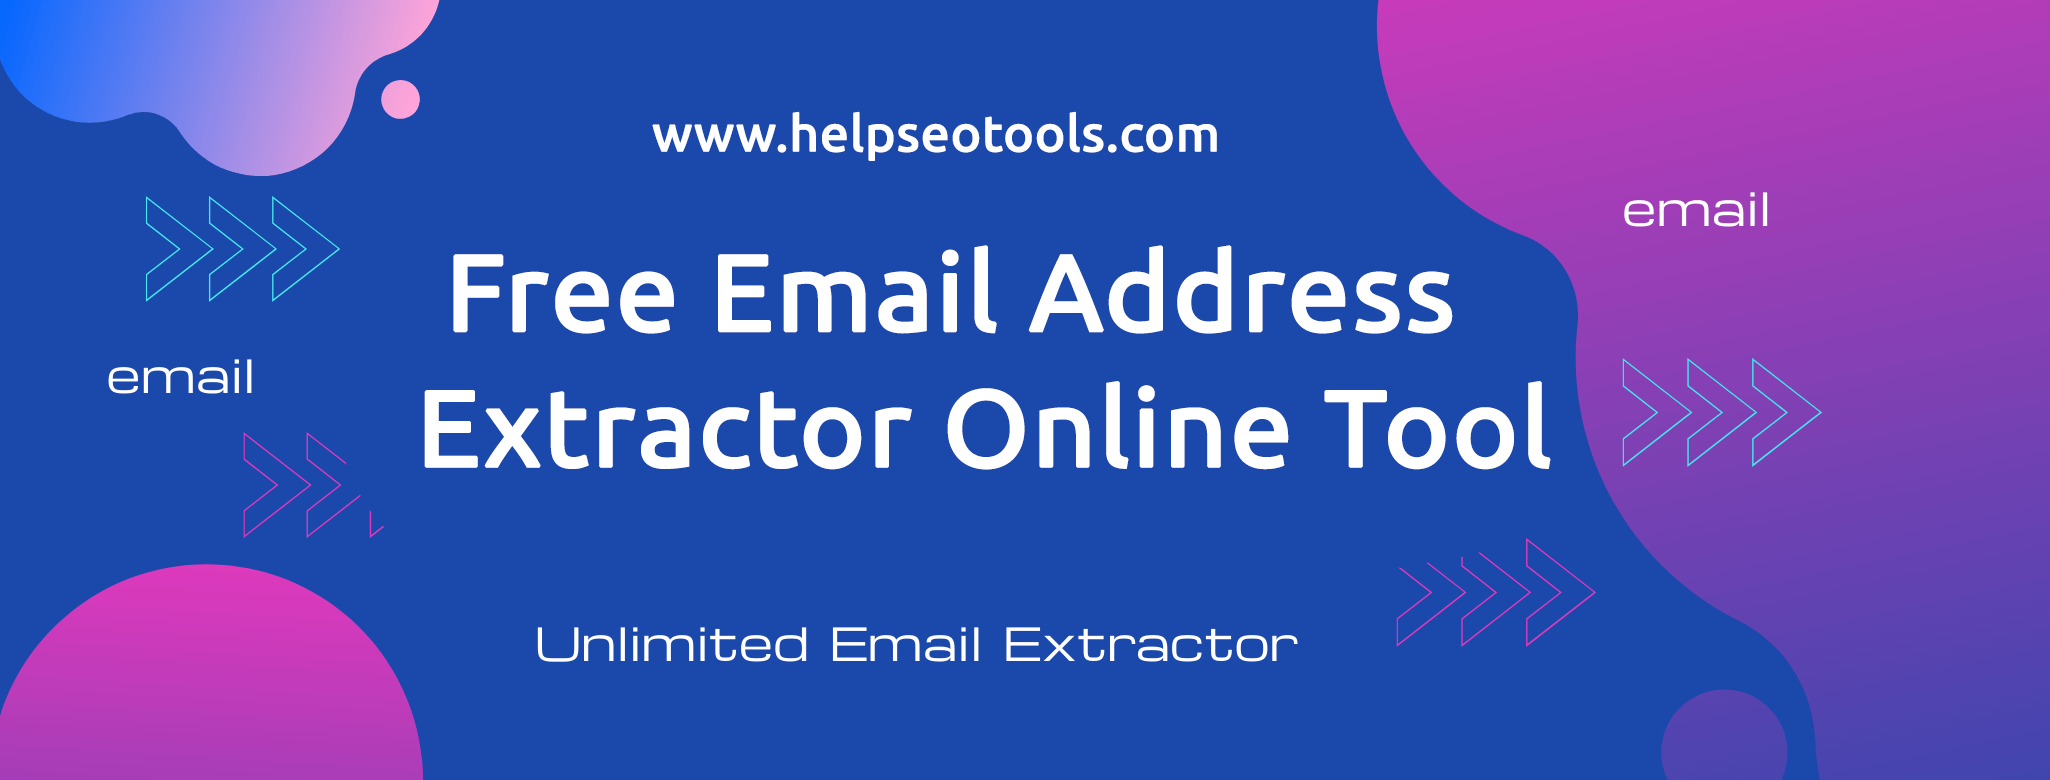 Free Online Tool For Extract Email Address From Text